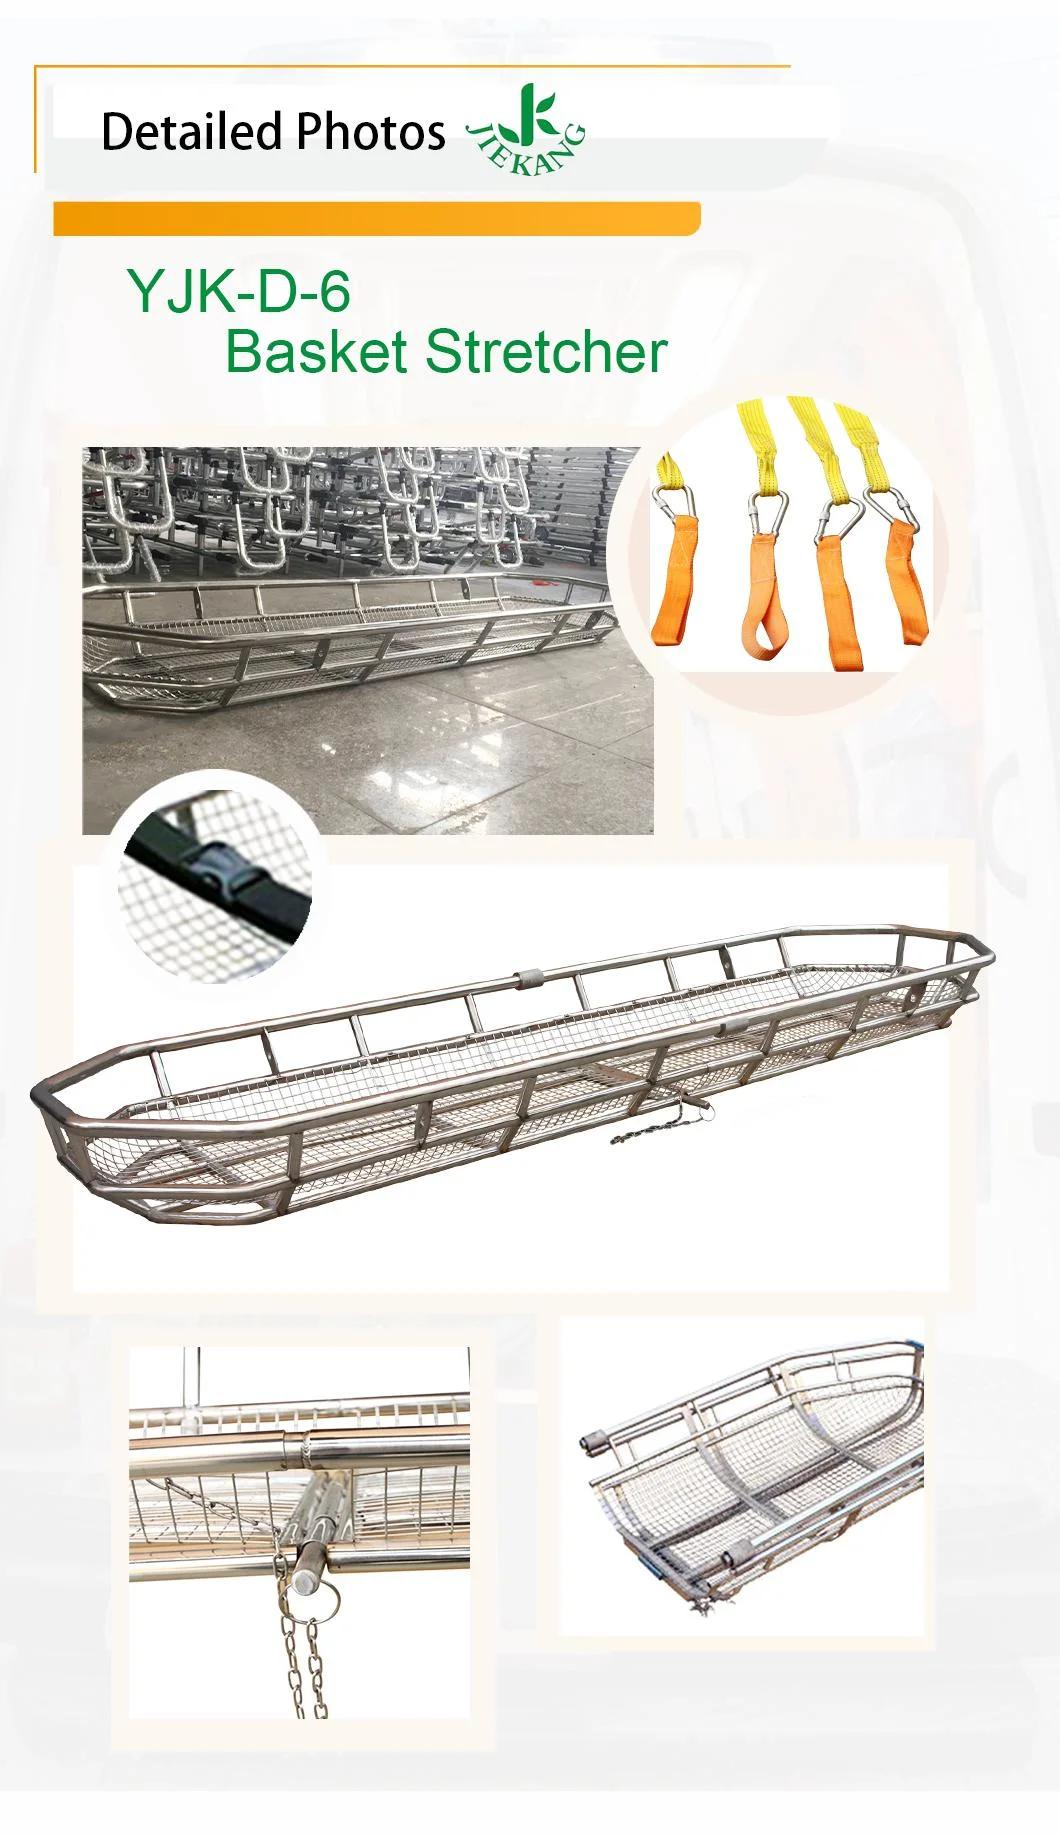 Stainless Steel Foldable Detachable Air Rescue Floating Device Basket Stretcher